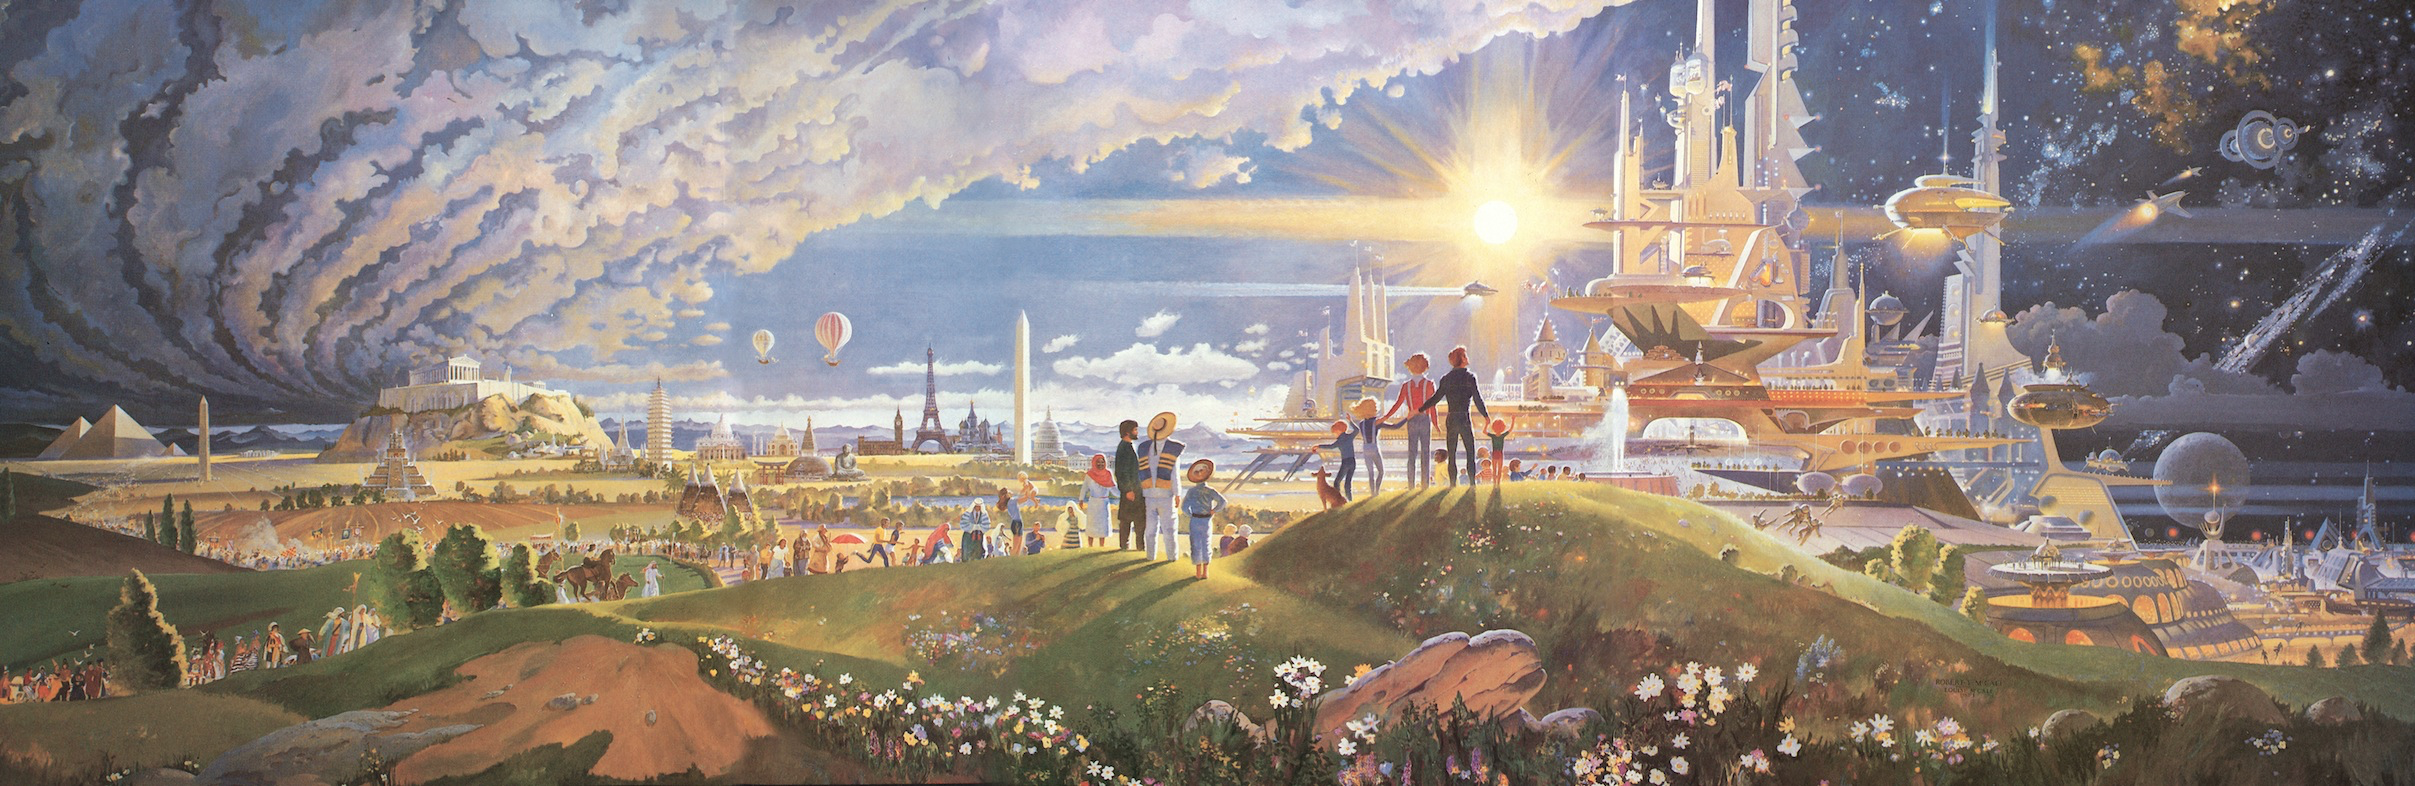 a painting by Robert McCall titled “The Prologue and the Promise”.